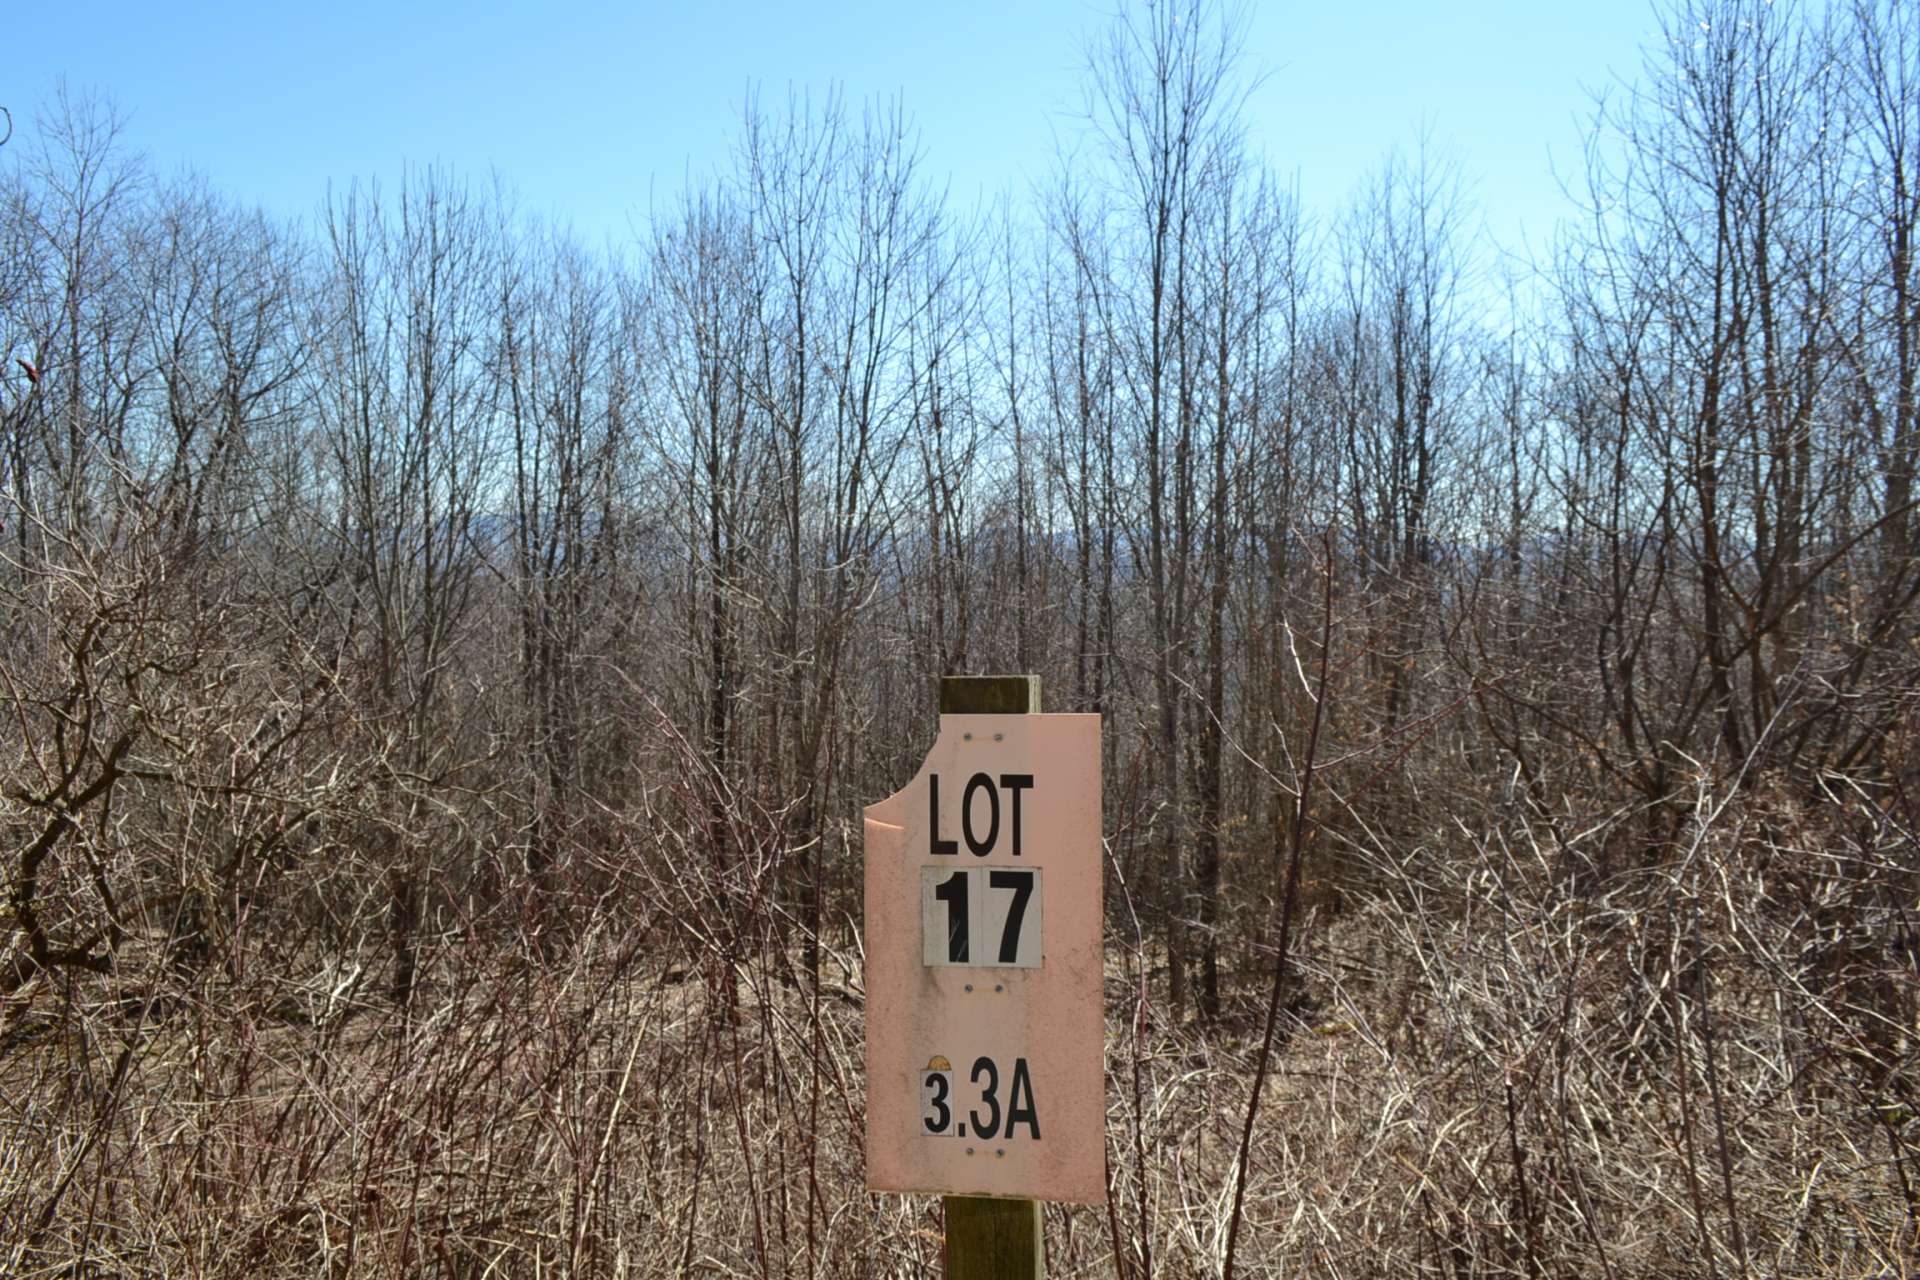 Lot 17 is comprised of 3.26 acres of Native hardwoods and mountain foliage. SOLD